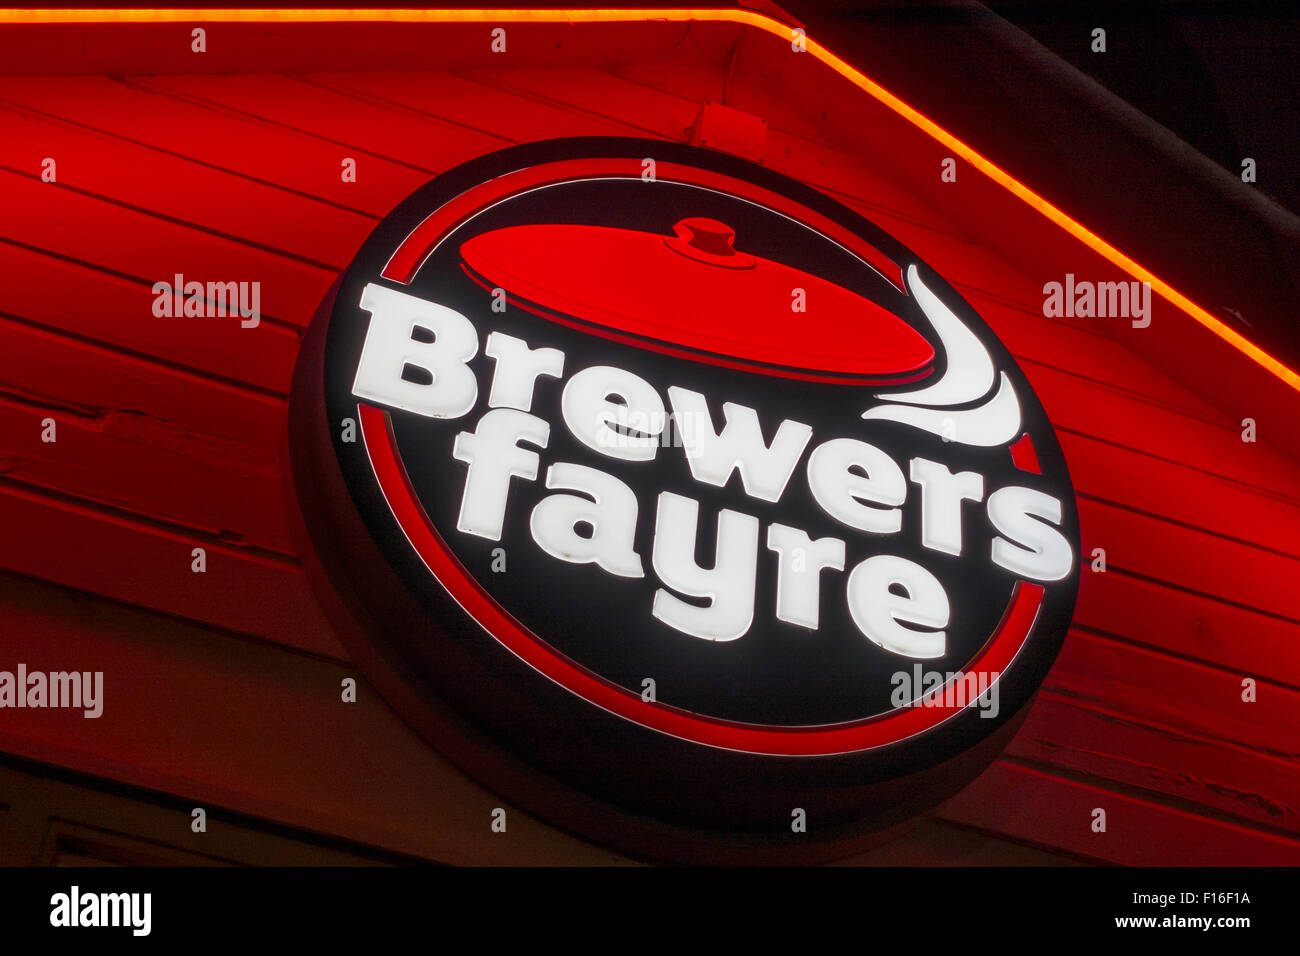 Brewers Fayre Restaurant Sign Stock Photo